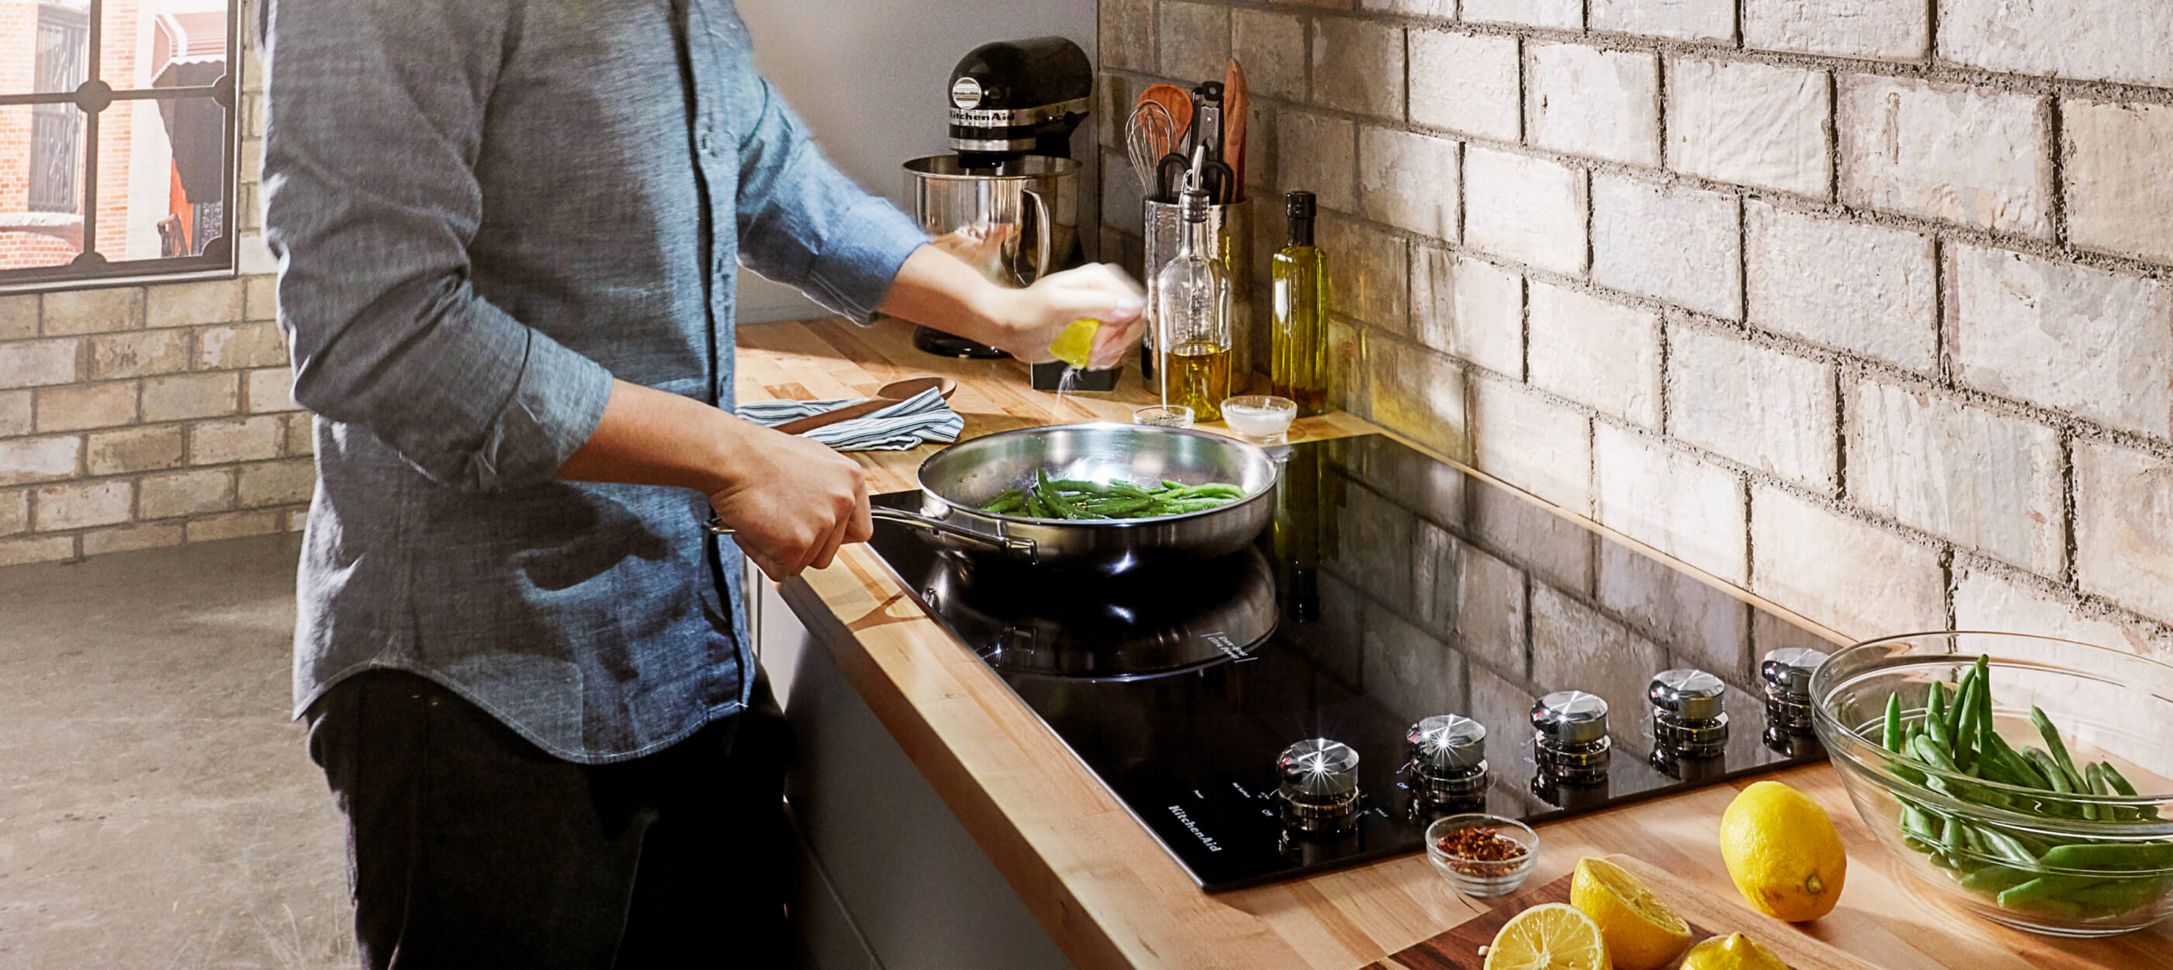 A person cooking over a KitchenAid® Cooktop.